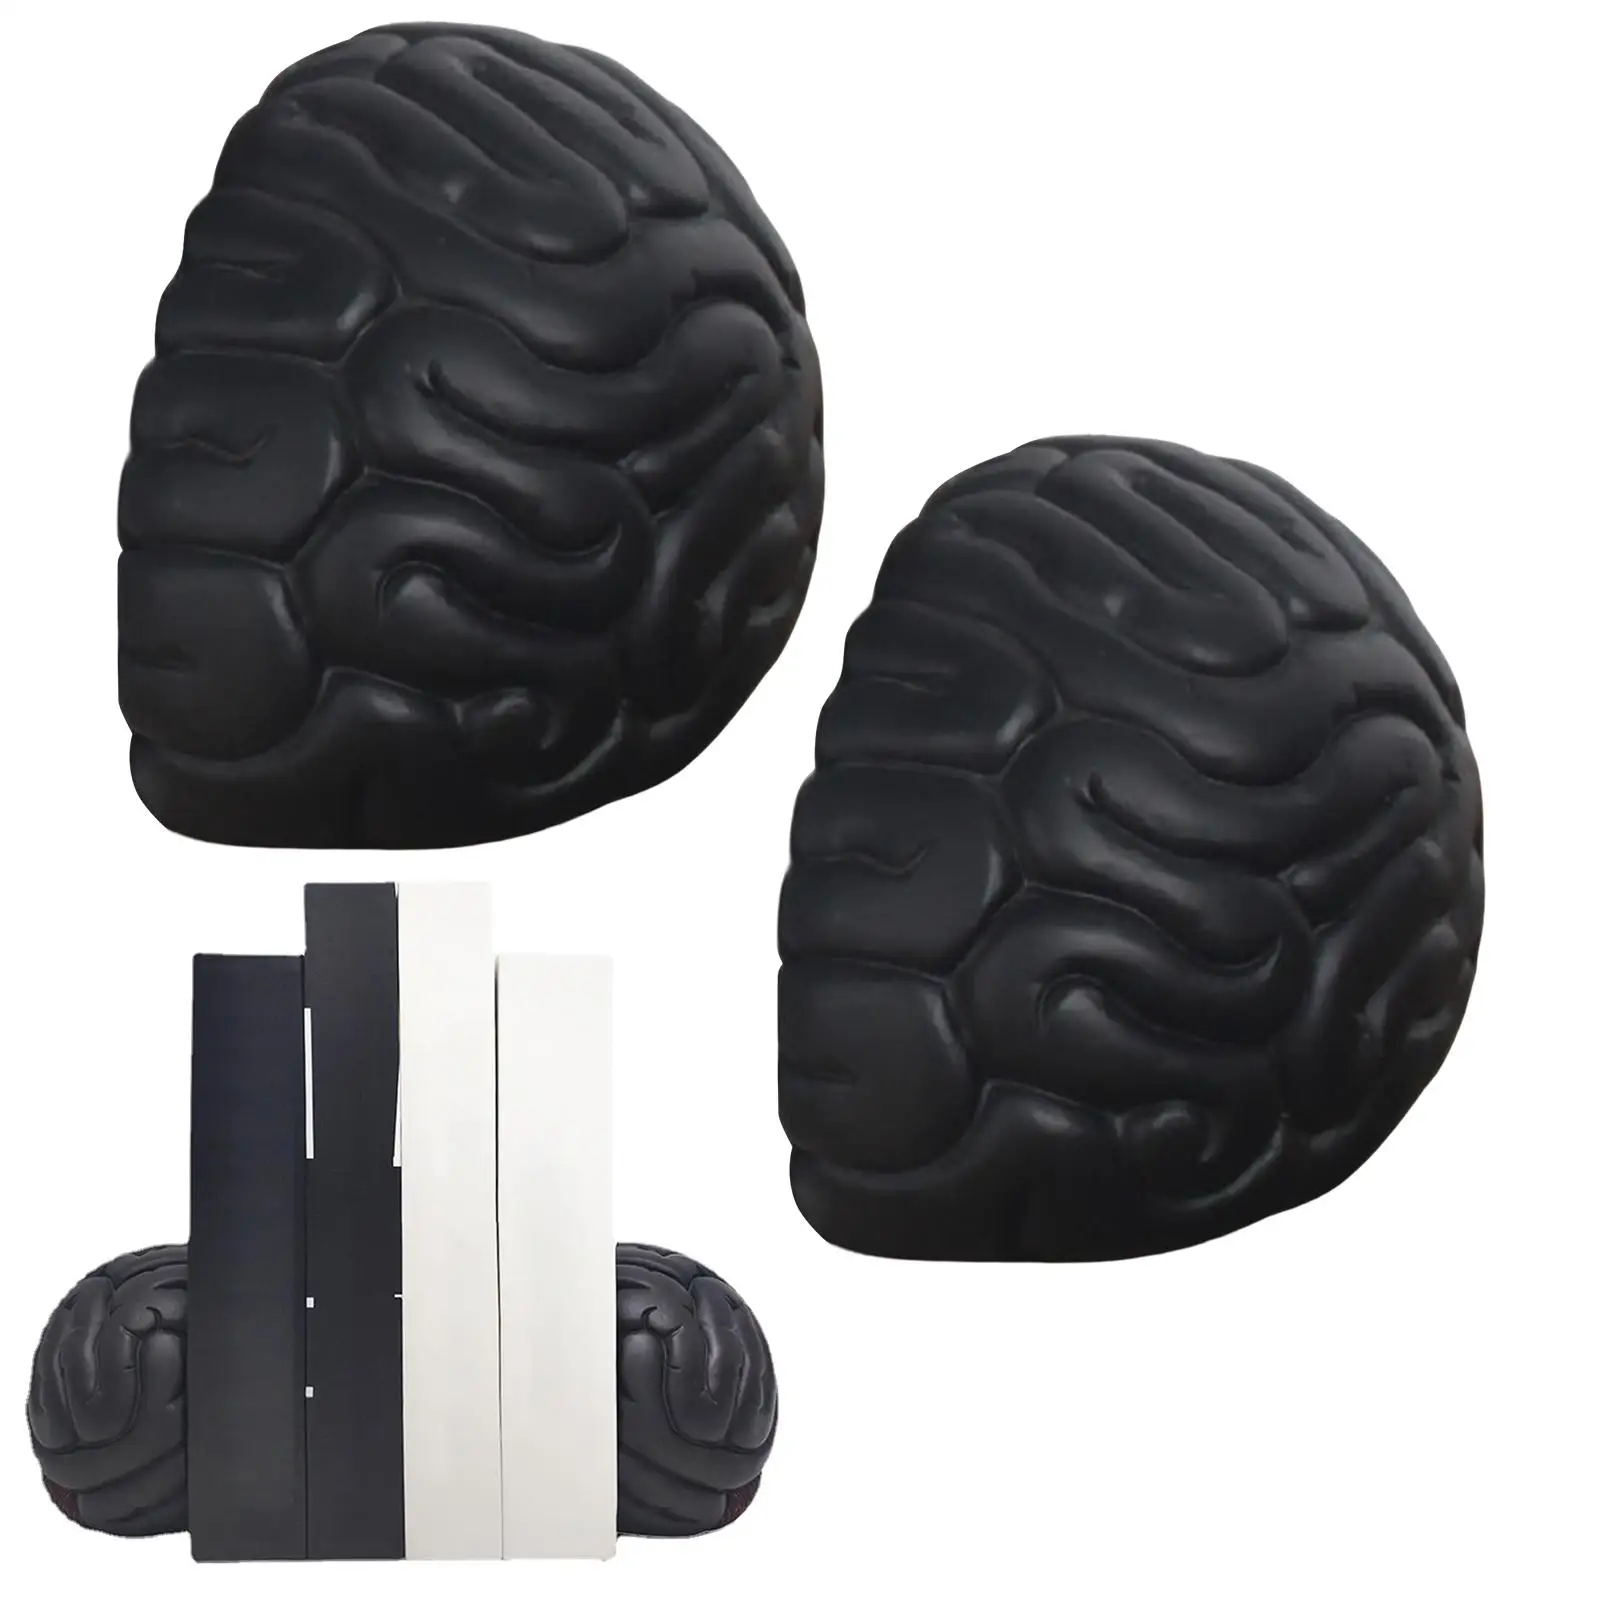 Book Ends Brain Shaped Decorations Organizers Sculpture Creative Heavy Duty Stoppers Bookends Book Ends Bookrack for Office Room